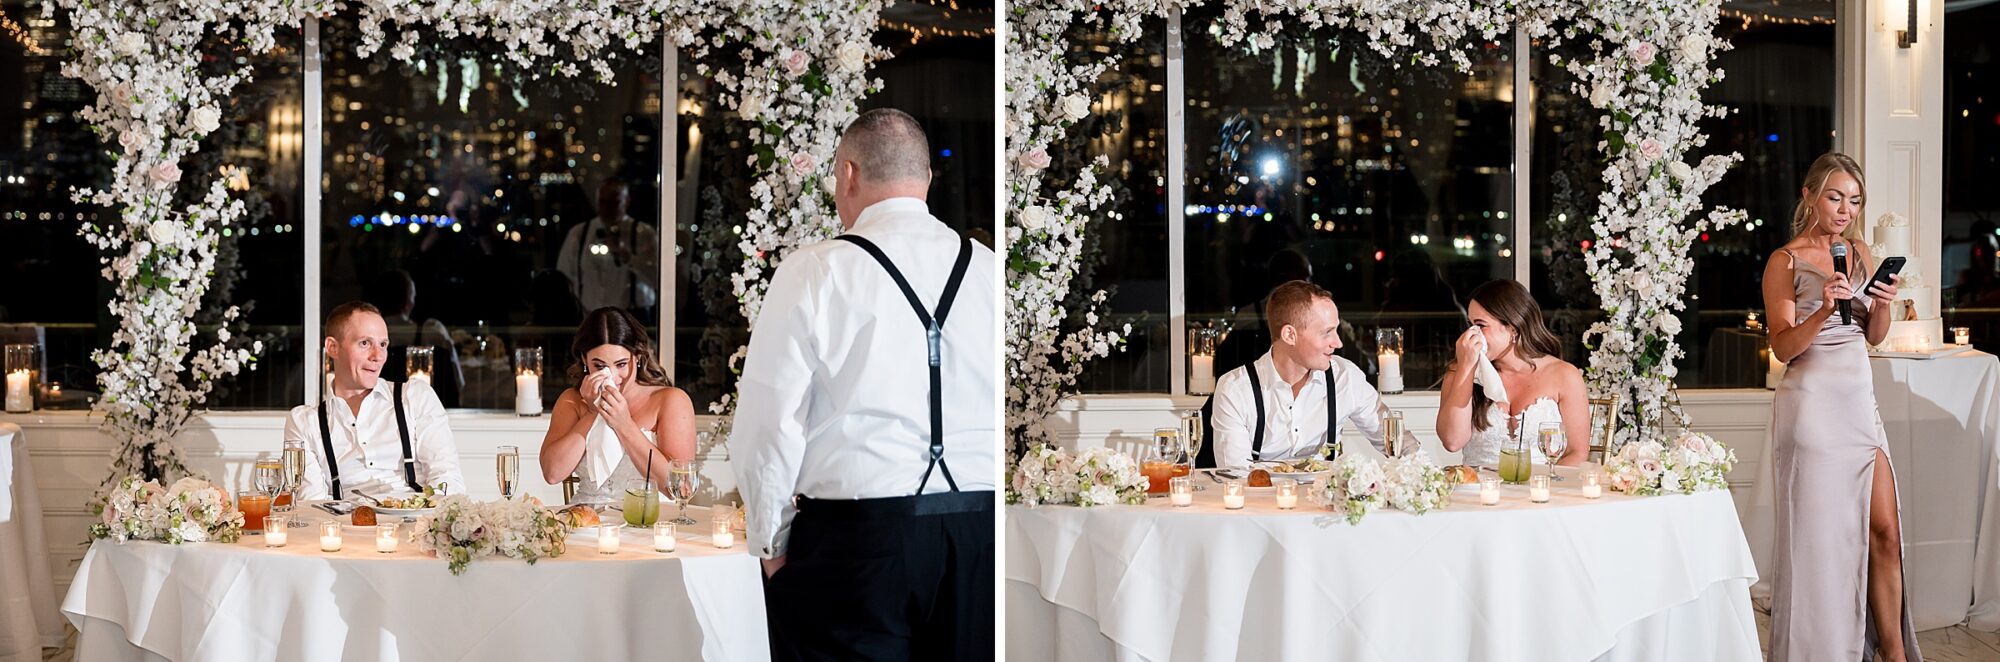 Two pictures of a bride and groom at a wedding reception at Liberty House in Jersey City NJ